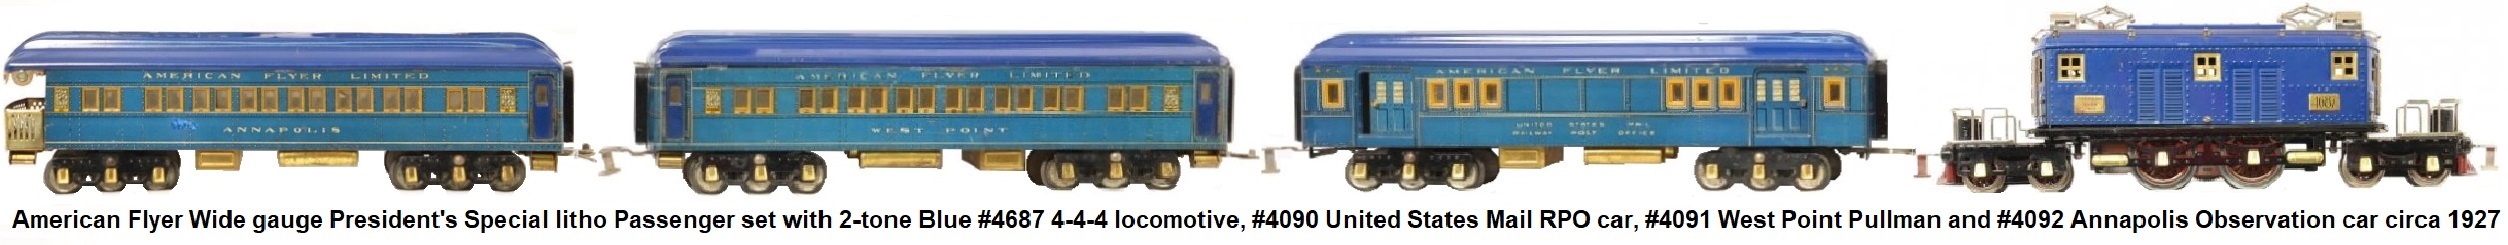 American Flyer Wide gauge Prewar President's Special lithographed passenger set consisting of Blue #4687 4-4-4 locomotive, #4090 United States Mail RPO car, #4091 West Point Pullman and #4092 Annapolis Observation car circa 1927